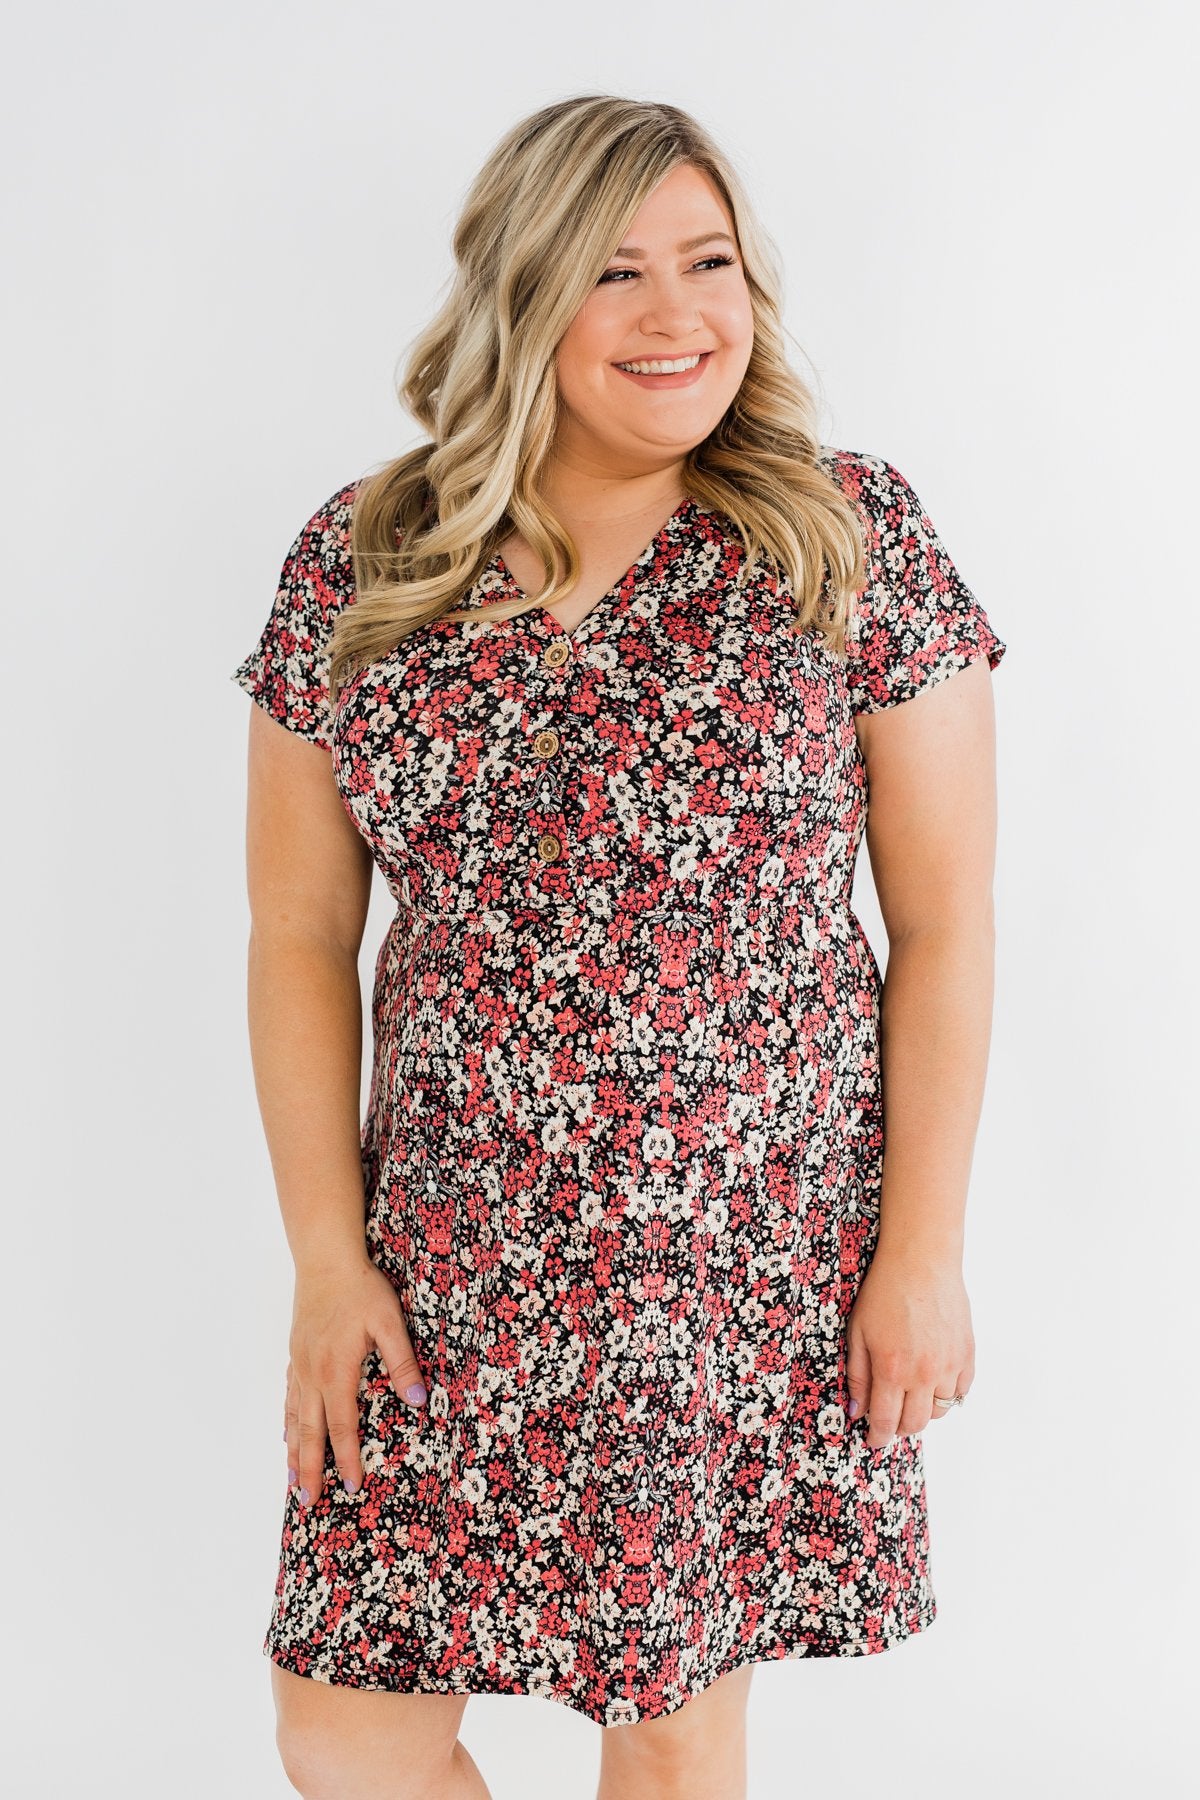 Just Say Yes Floral Button Dress- Black & Pink